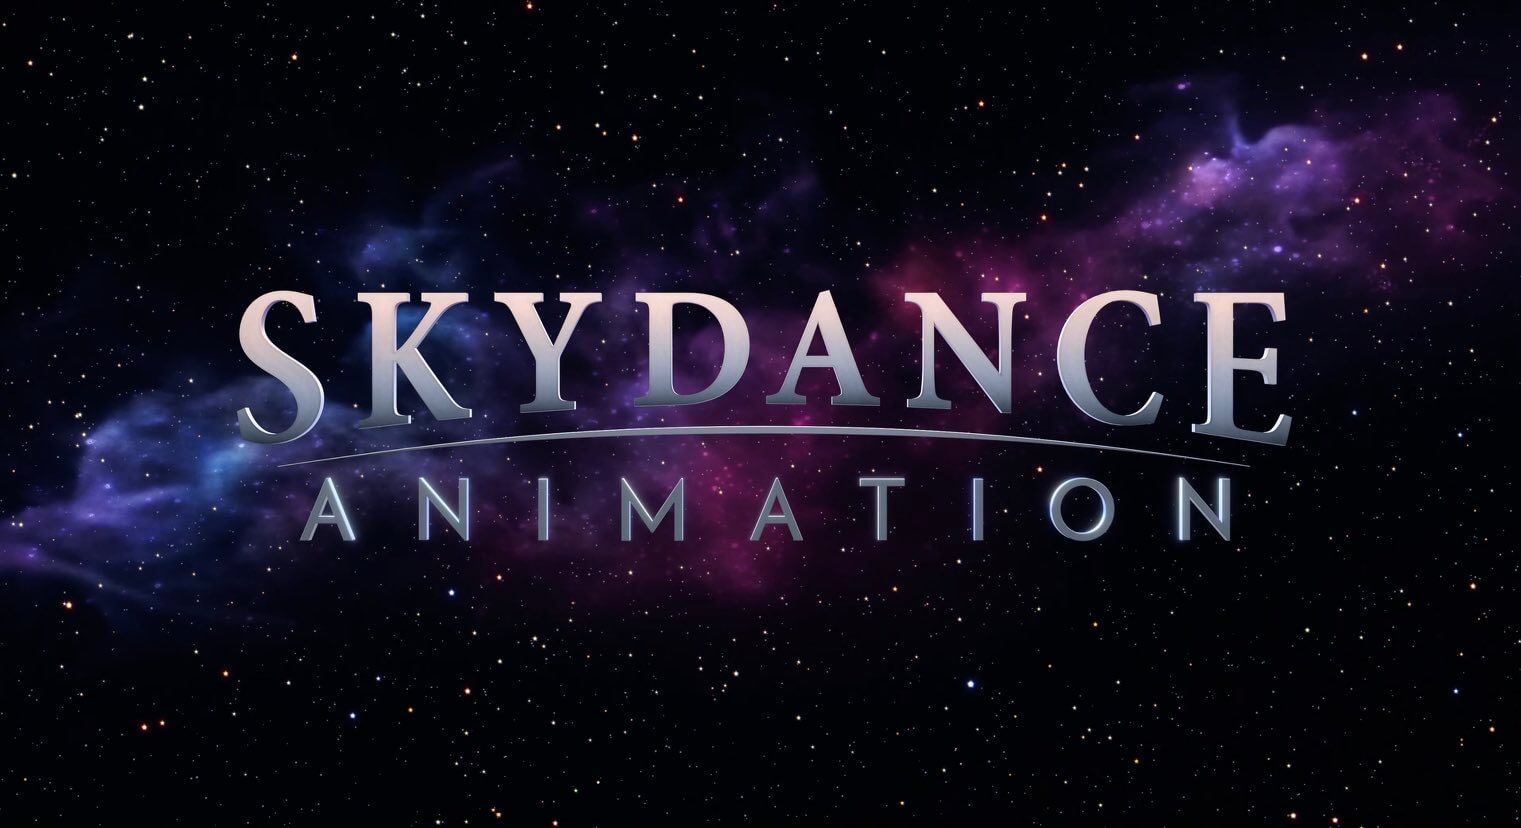 Skydance Animation Movie List And History LovelyCharacters Com